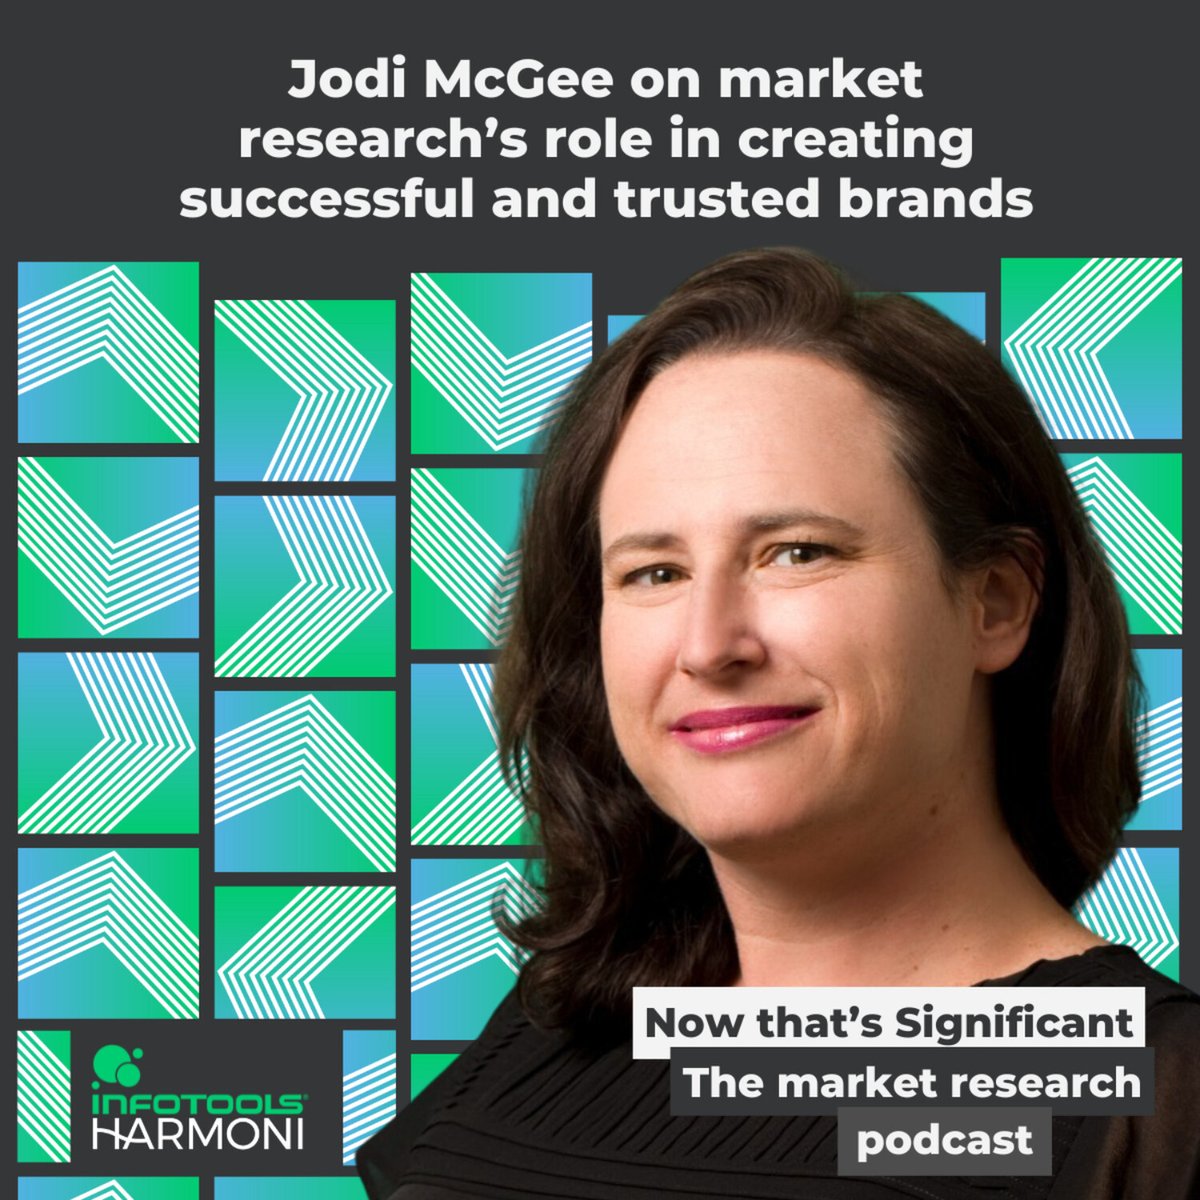 Earlier this year, Jodi McGee of Inquisitive Insights joined our podcast to talk with us about the role of #marketresearch role in creating successful and trusted brands. Did you miss it? Listen here: hubs.li/Q02nJjbB0 #branding #insights #mrx